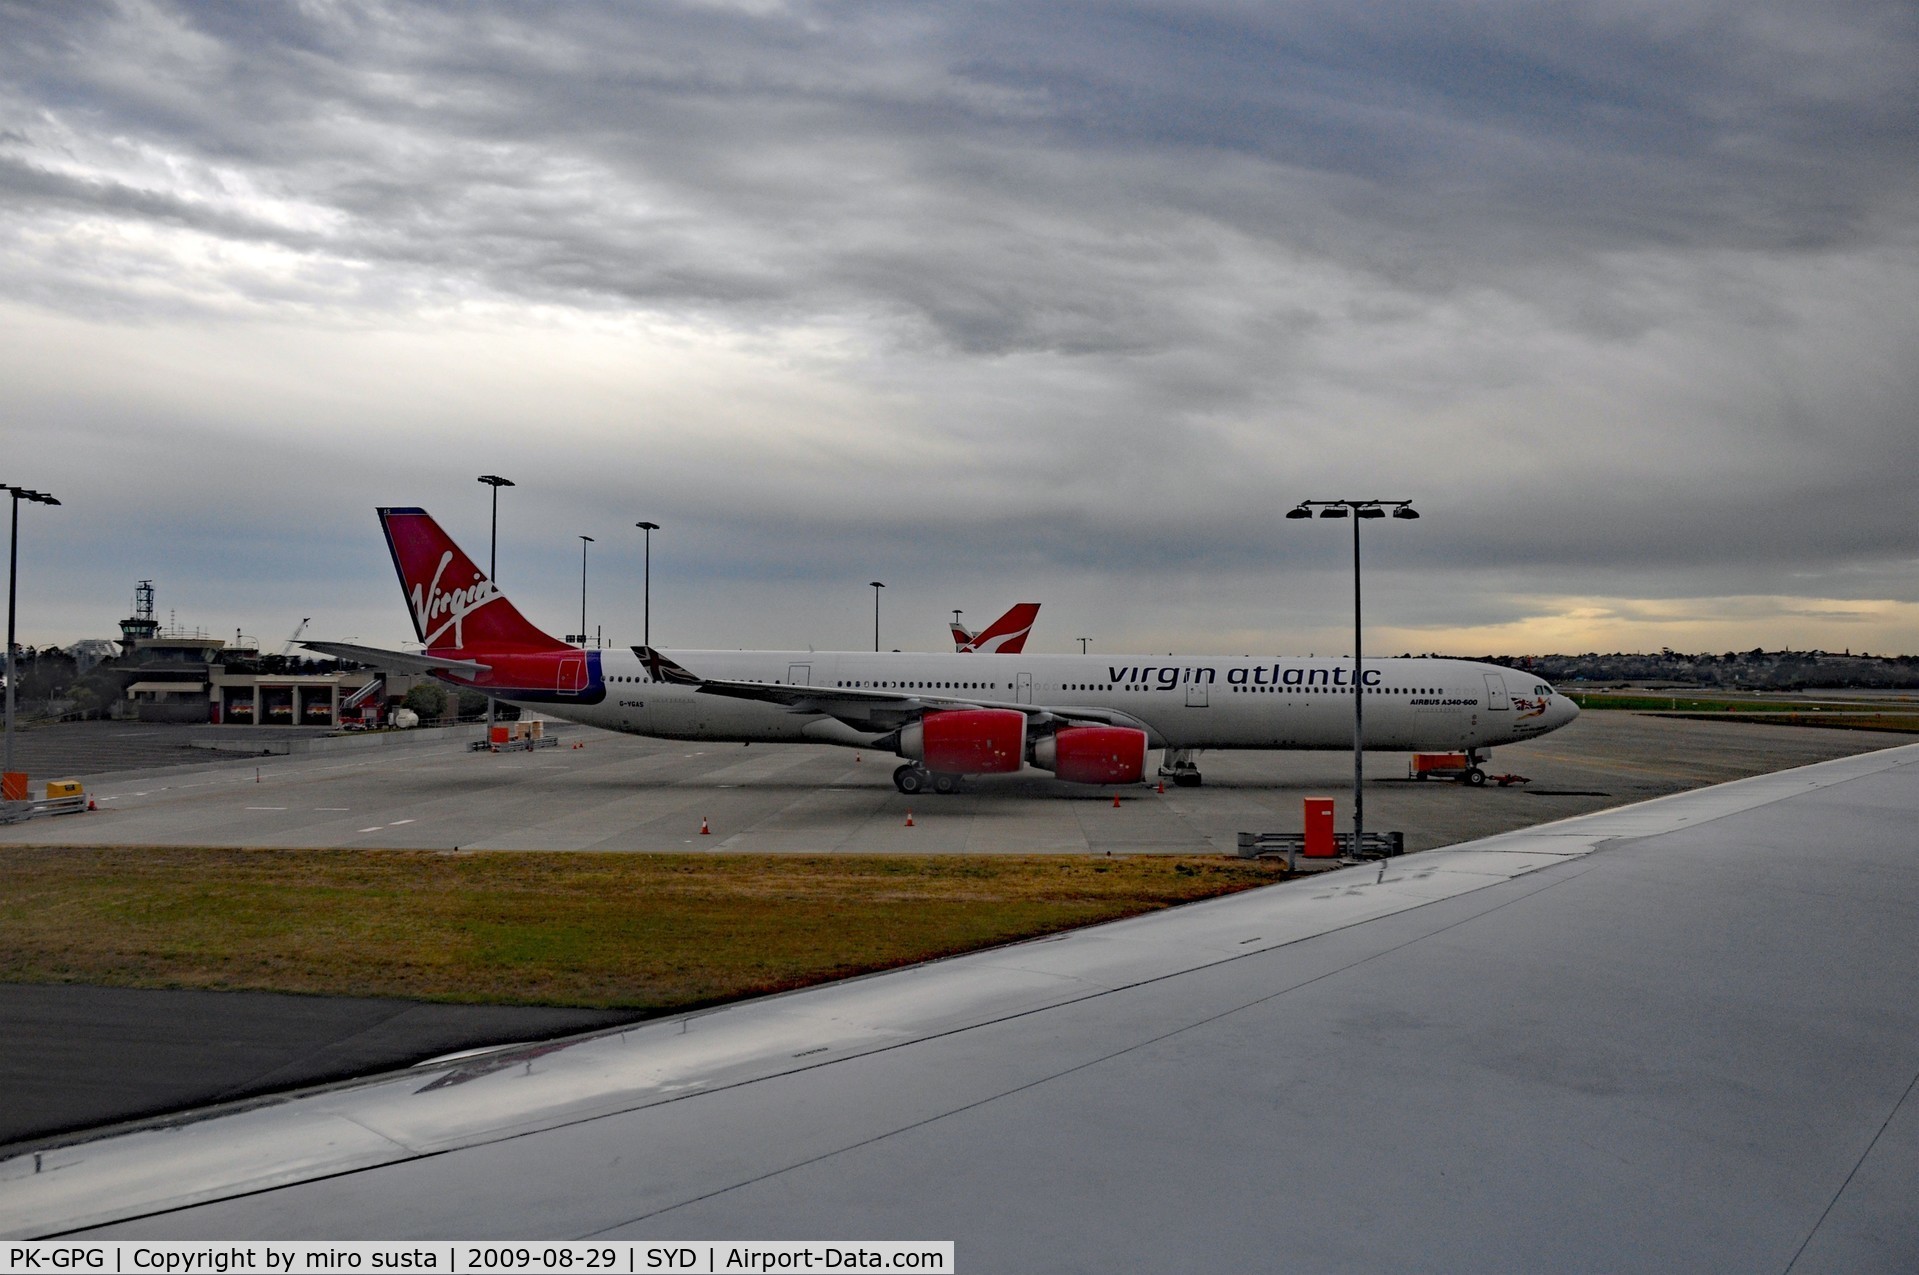 PK-GPG, 1997 Airbus A330-341 C/N 165, Virgin Airlines Airbus A340-642 Airplane, Sydney